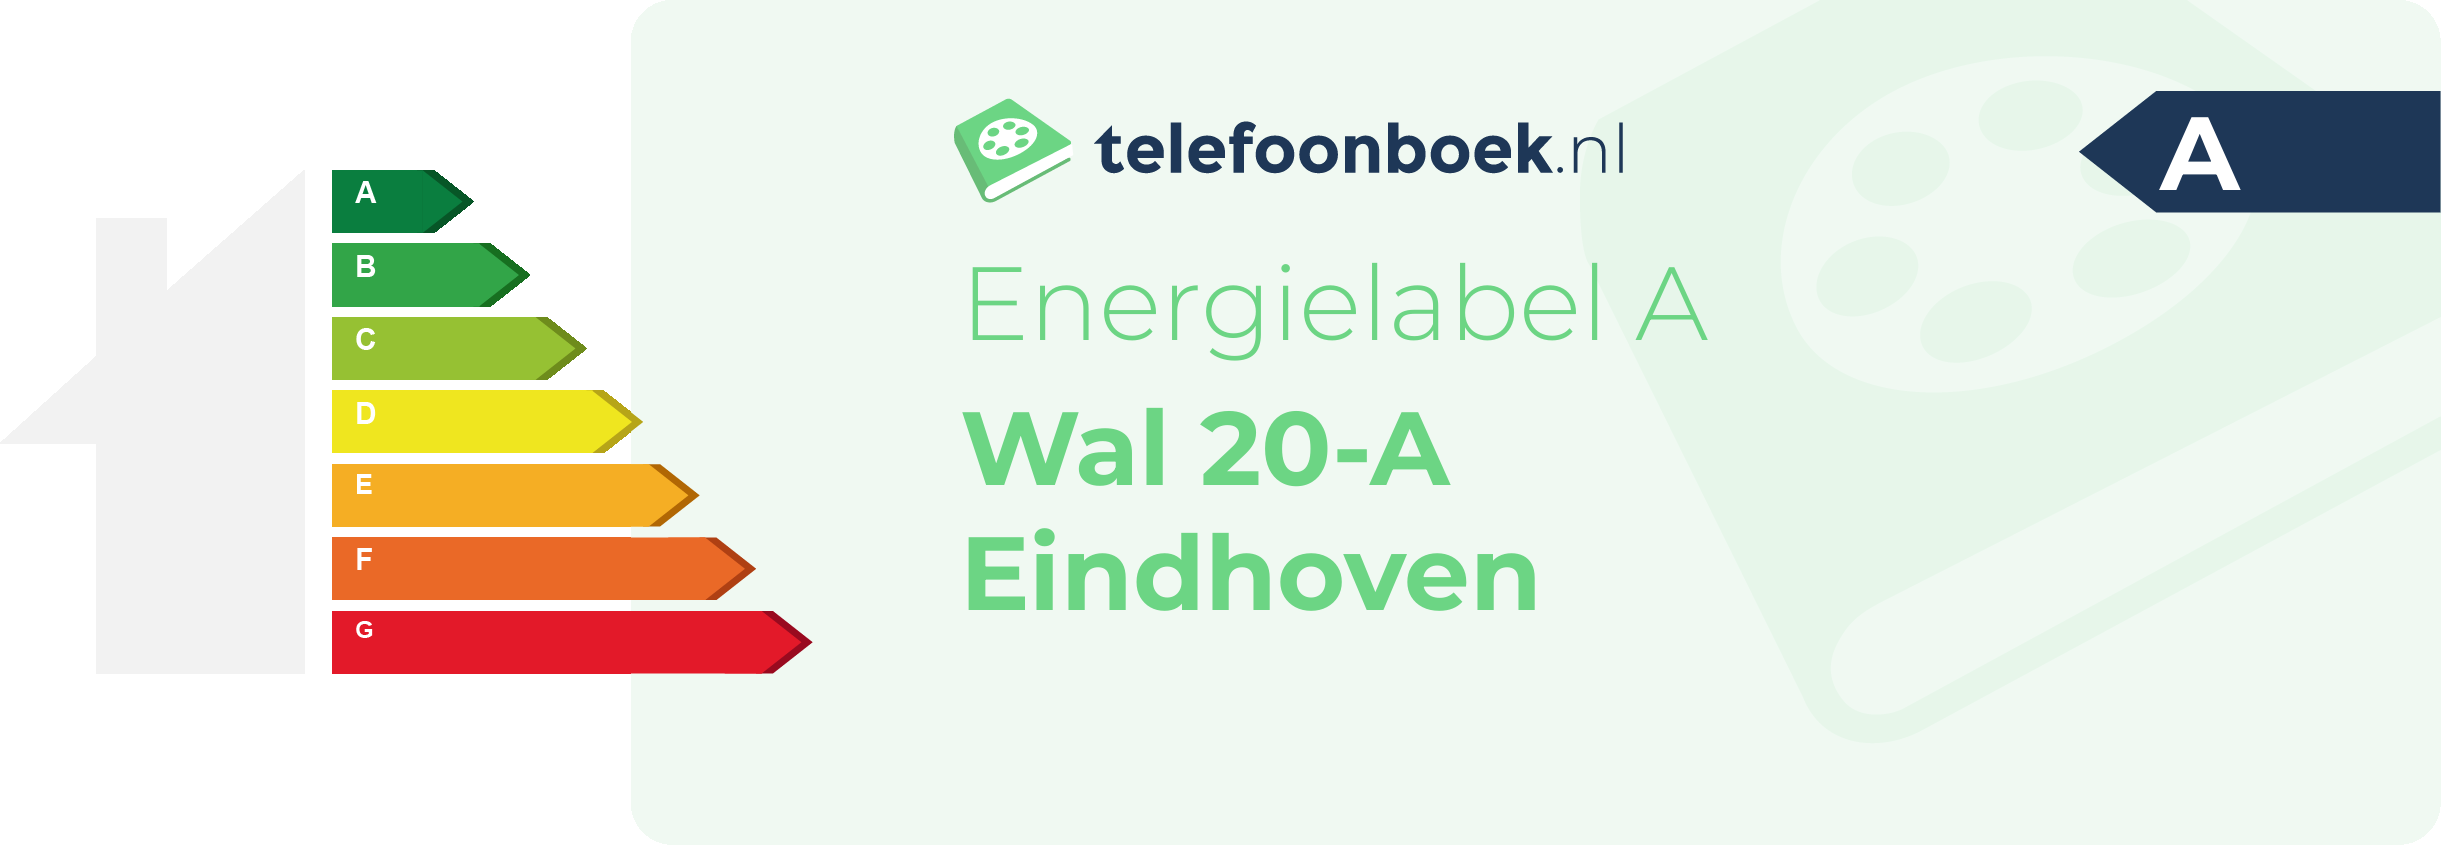 Energielabel Wal 20-A Eindhoven